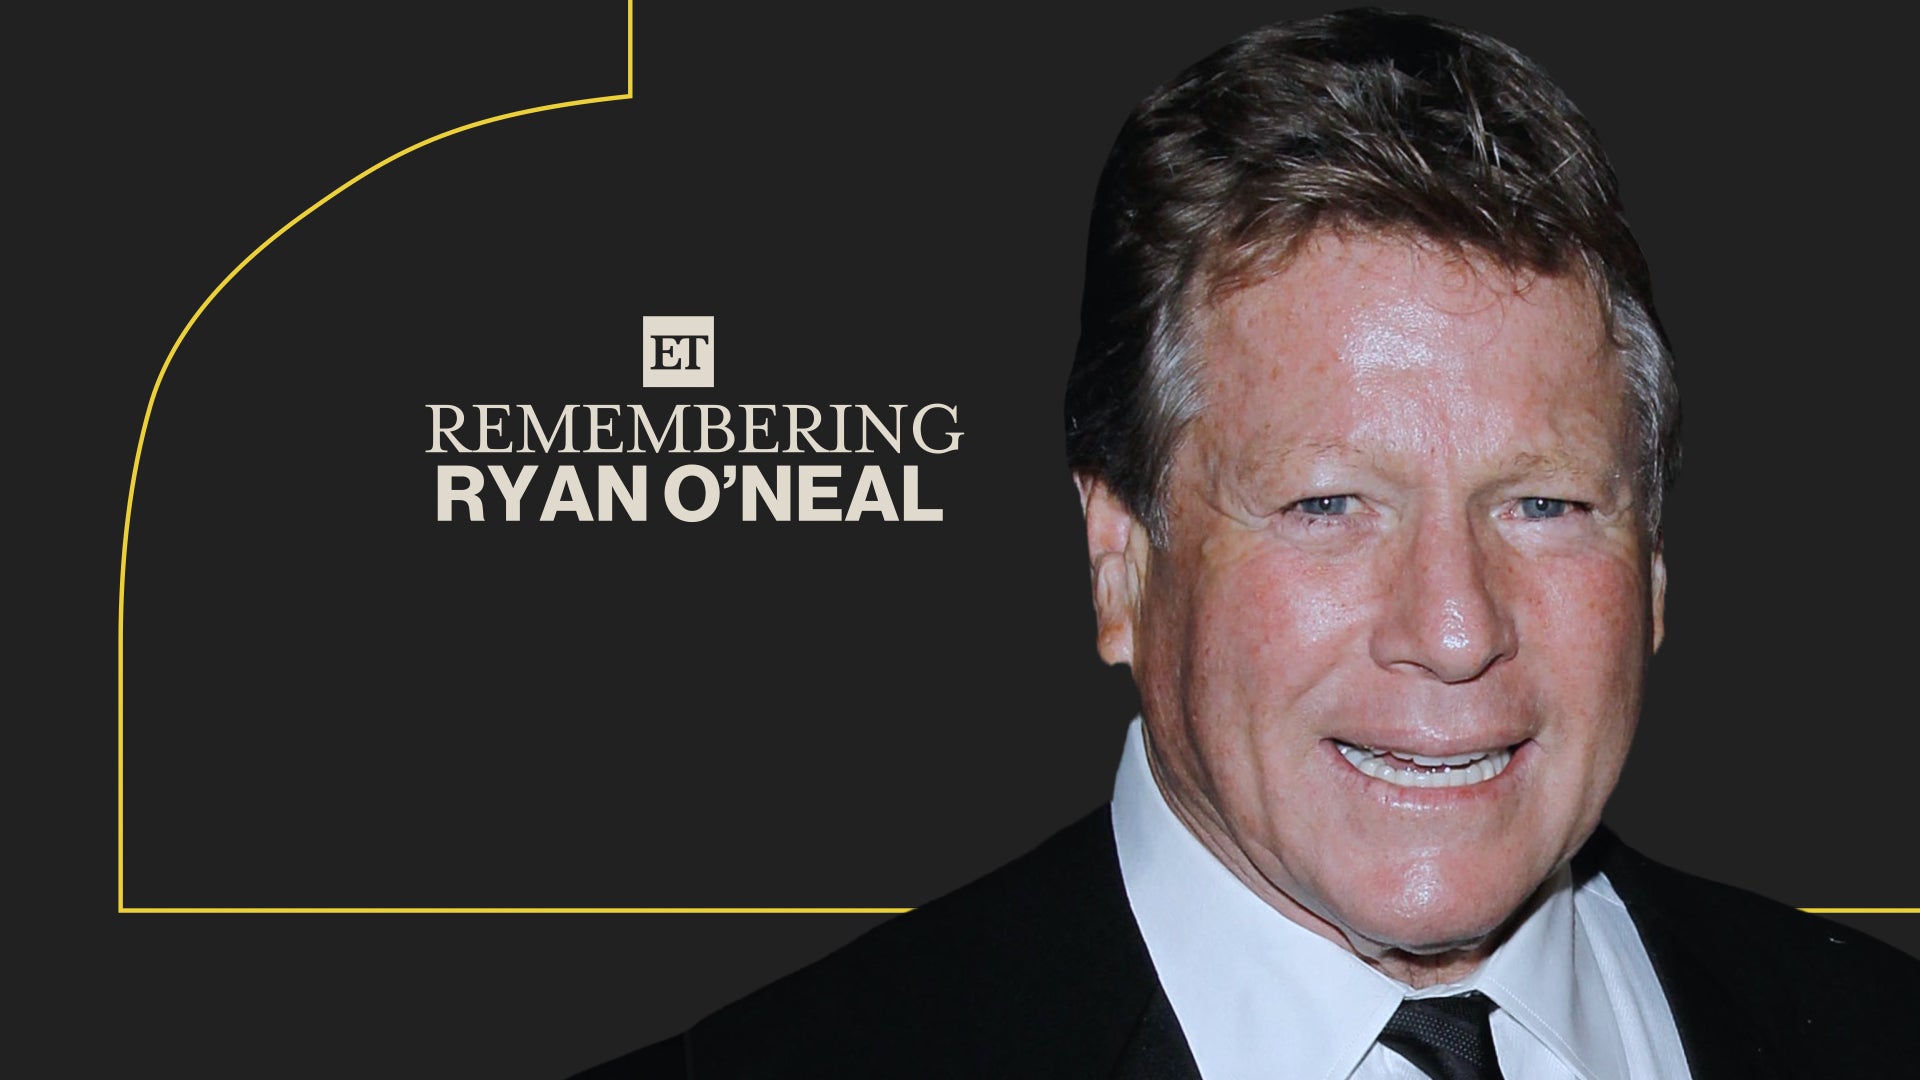 Ryan O'Neal, 'Love Story' Actor, Dead at 82